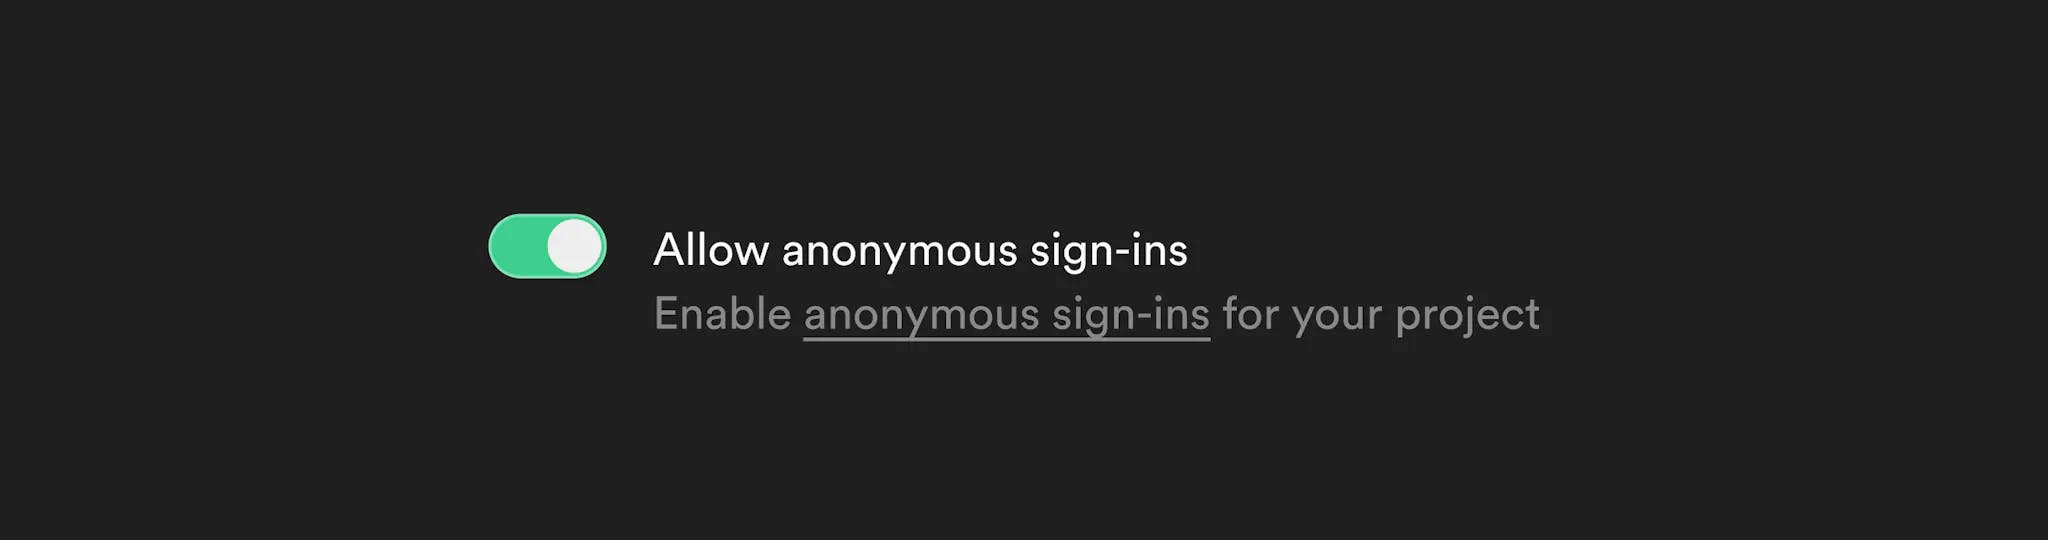 allow-anon-sign-ins